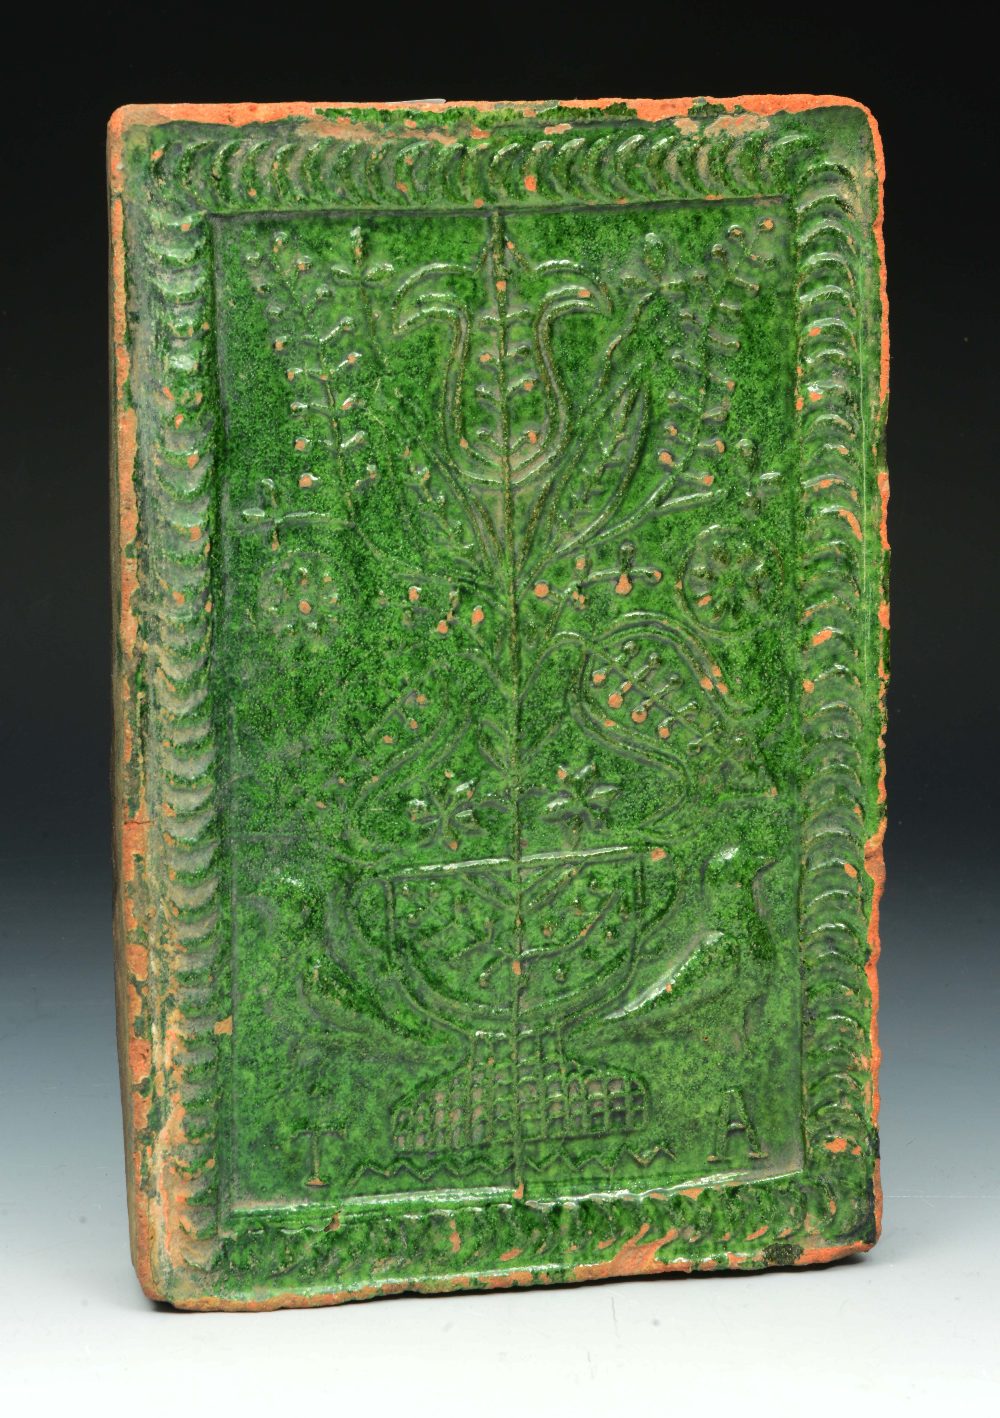 Lot 337 - A 17TH CENTURY ENGLISH GREEN SLIPWARE MARRIAGE STOVE TILE decorated with a central tulip and two bir